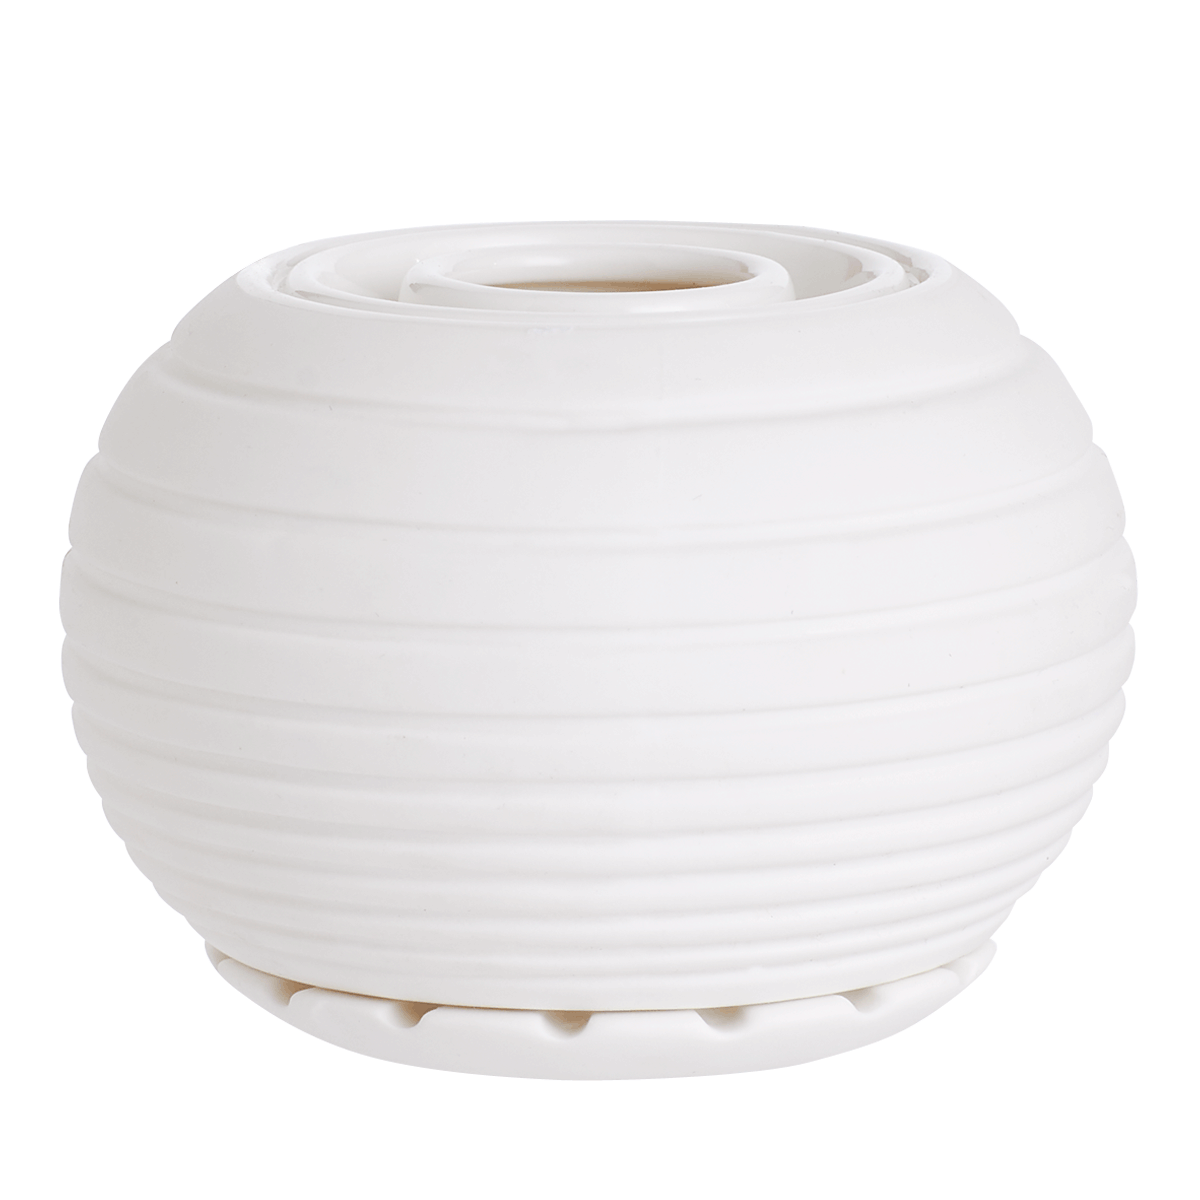 Illuminescents‚™ Clean Lines Fragrance Warmer - PartyLite US